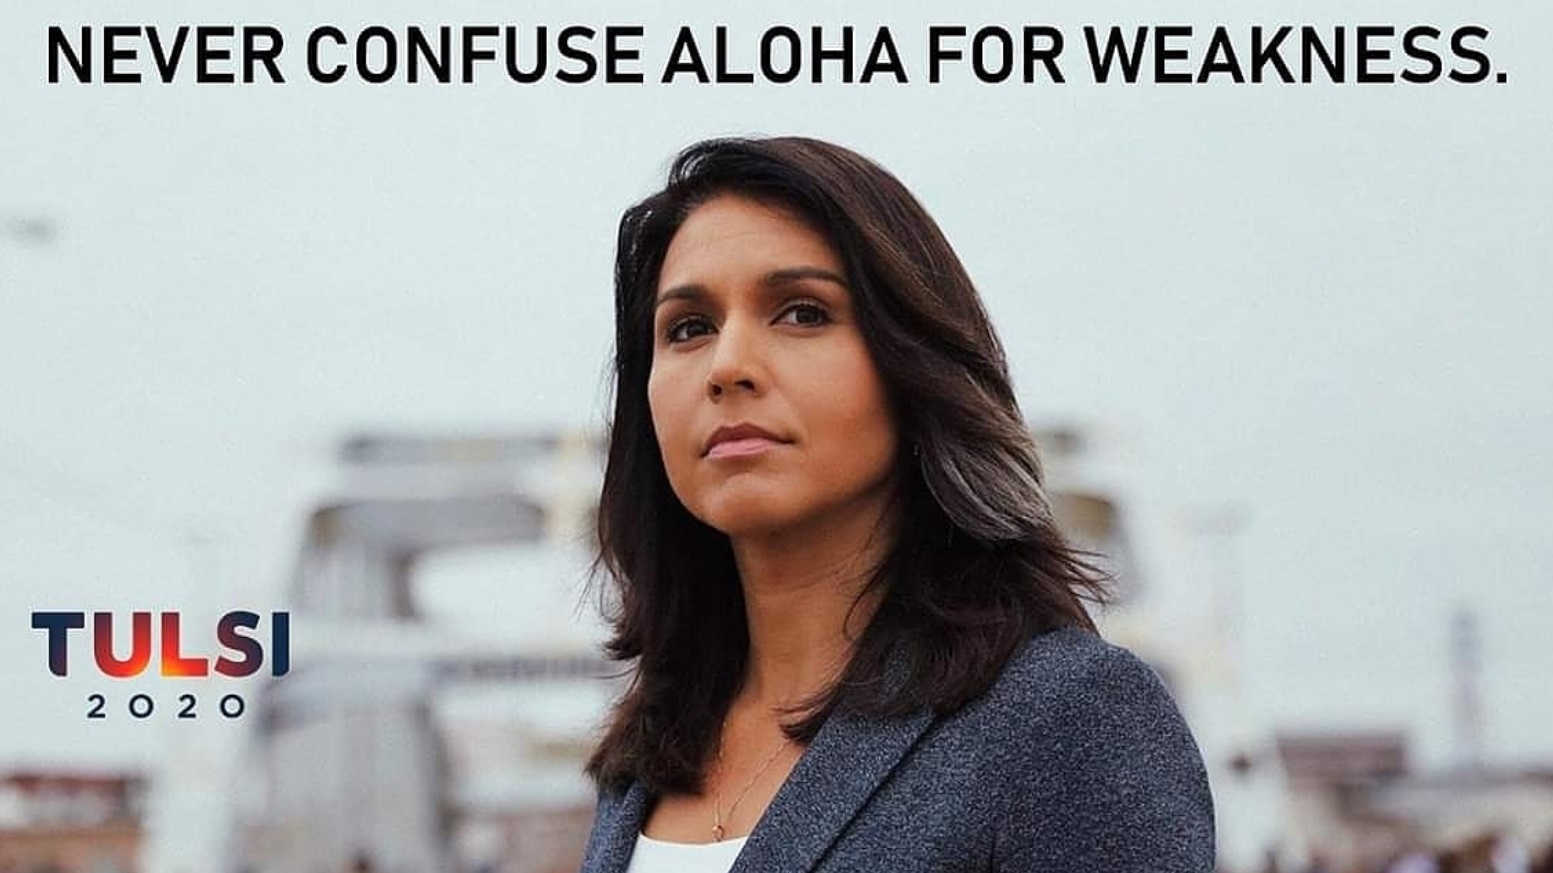 PHOTO Tulsi Gabbard Never Confuse Aloha For Weakness